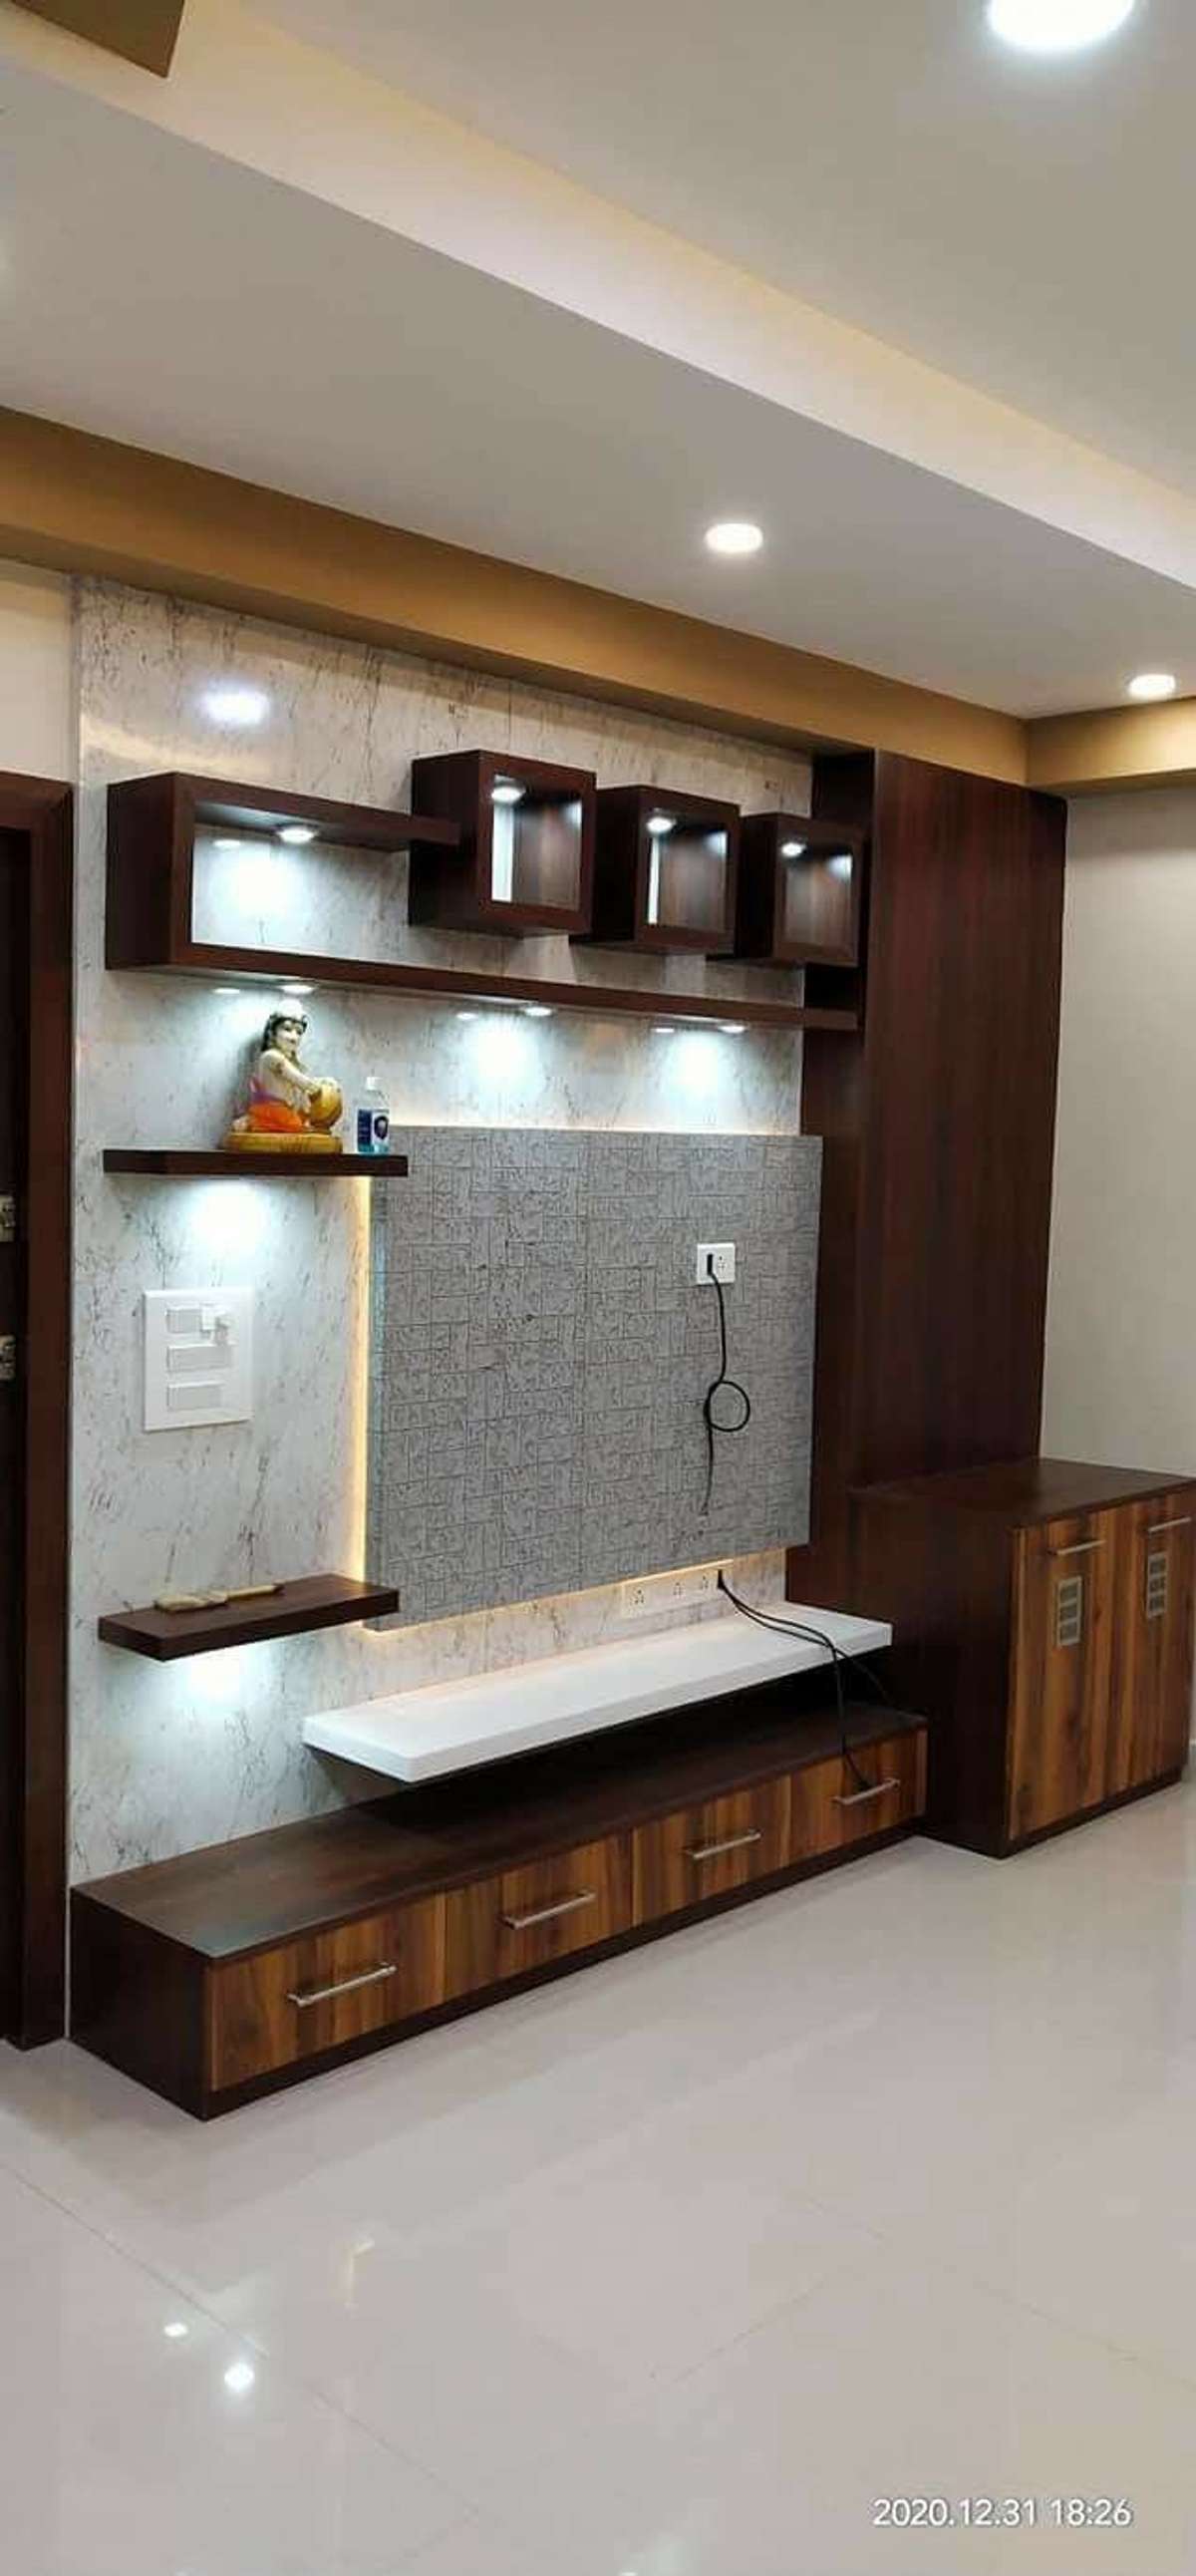 https://youtube.com/channel/UCoGxrToJk75H-hHKOcvHzeQ Subscribe my YouTube channel /FOR Carpenters Call Me 99 272 888 82
Contact Me : For Kitchen & Cupboards Work
I work only in labour rate carpenter available in all Kerala Whatsapp me https://wa.me/919927288882________________________________________________________________________________
#kerala #architecture, #kerala #architect, #kerala #architecture #house #design, #kerala #architecture #house, #kerala #architect #home #design, #kerala #architecture #homes, kerala architecture Living  р┤Ьр┤┐р┤кр╡Нр┤╕р┤В р┤╕р┤┐р┤▓р┤┐р┤Щр╡Н р┤╡р┤┐р┤др╡Нр┤др╡Н р┤╡р╡Бр┤бр╡╗ р┤╡р╡╝р┤Хр╡Нр┤Хр╡Н ,dining,stair area р┤Ьр┤┐р┤кр╡Нр┤╕р┤В р┤╕р┤┐р┤▓р┤┐р┤Щр╡Н , р┤кр┤░р╡Нр┤Чр╡Лр┤│ р┤кр┤╛р┤ир┤▓р┤┐р┤Щр╡Н ,Tv unit  stair р┤Пр┤░р┤┐р┤п with storage ,architraves,
Modular kitchen , work area ,
living wall texture painting , р┤╕р╡Ар┤мр╡Нр┤░ р┤мр╡Нр┤▓р╡Ир╡╗р┤бр╡НтАМр┤╕р╡Н р┤Ор┤ир╡А р┤╡р╡╝р┤Хр╡Нр┤Хр╡Бр┤Хр╡╛ р┤Жр┤гр╡Н р┤Зр┤╡р┤┐р┤Яр╡Ж р┤Ър╡Жр┤пр╡Нр┤др┤┐р┤░р┤┐р┤Хр╡Бр┤ир┤др╡Н .

710 marine plywood with mica lamination р┤Жр┤гр╡Н р┤Йр┤кр┤пр╡Лр┤Чр┤┐р┤Ър╡Нр┤Ър┤┐р┤░р┤┐р┤Хр╡Нр┤Хр╡Бр┤ир╡Нр┤ир┤др╡Н.

Special Thanks Kerala carpentry team for your hard work 

For more information pls call 

Kerala Interiors
+9199272 88882
Kerala Architect